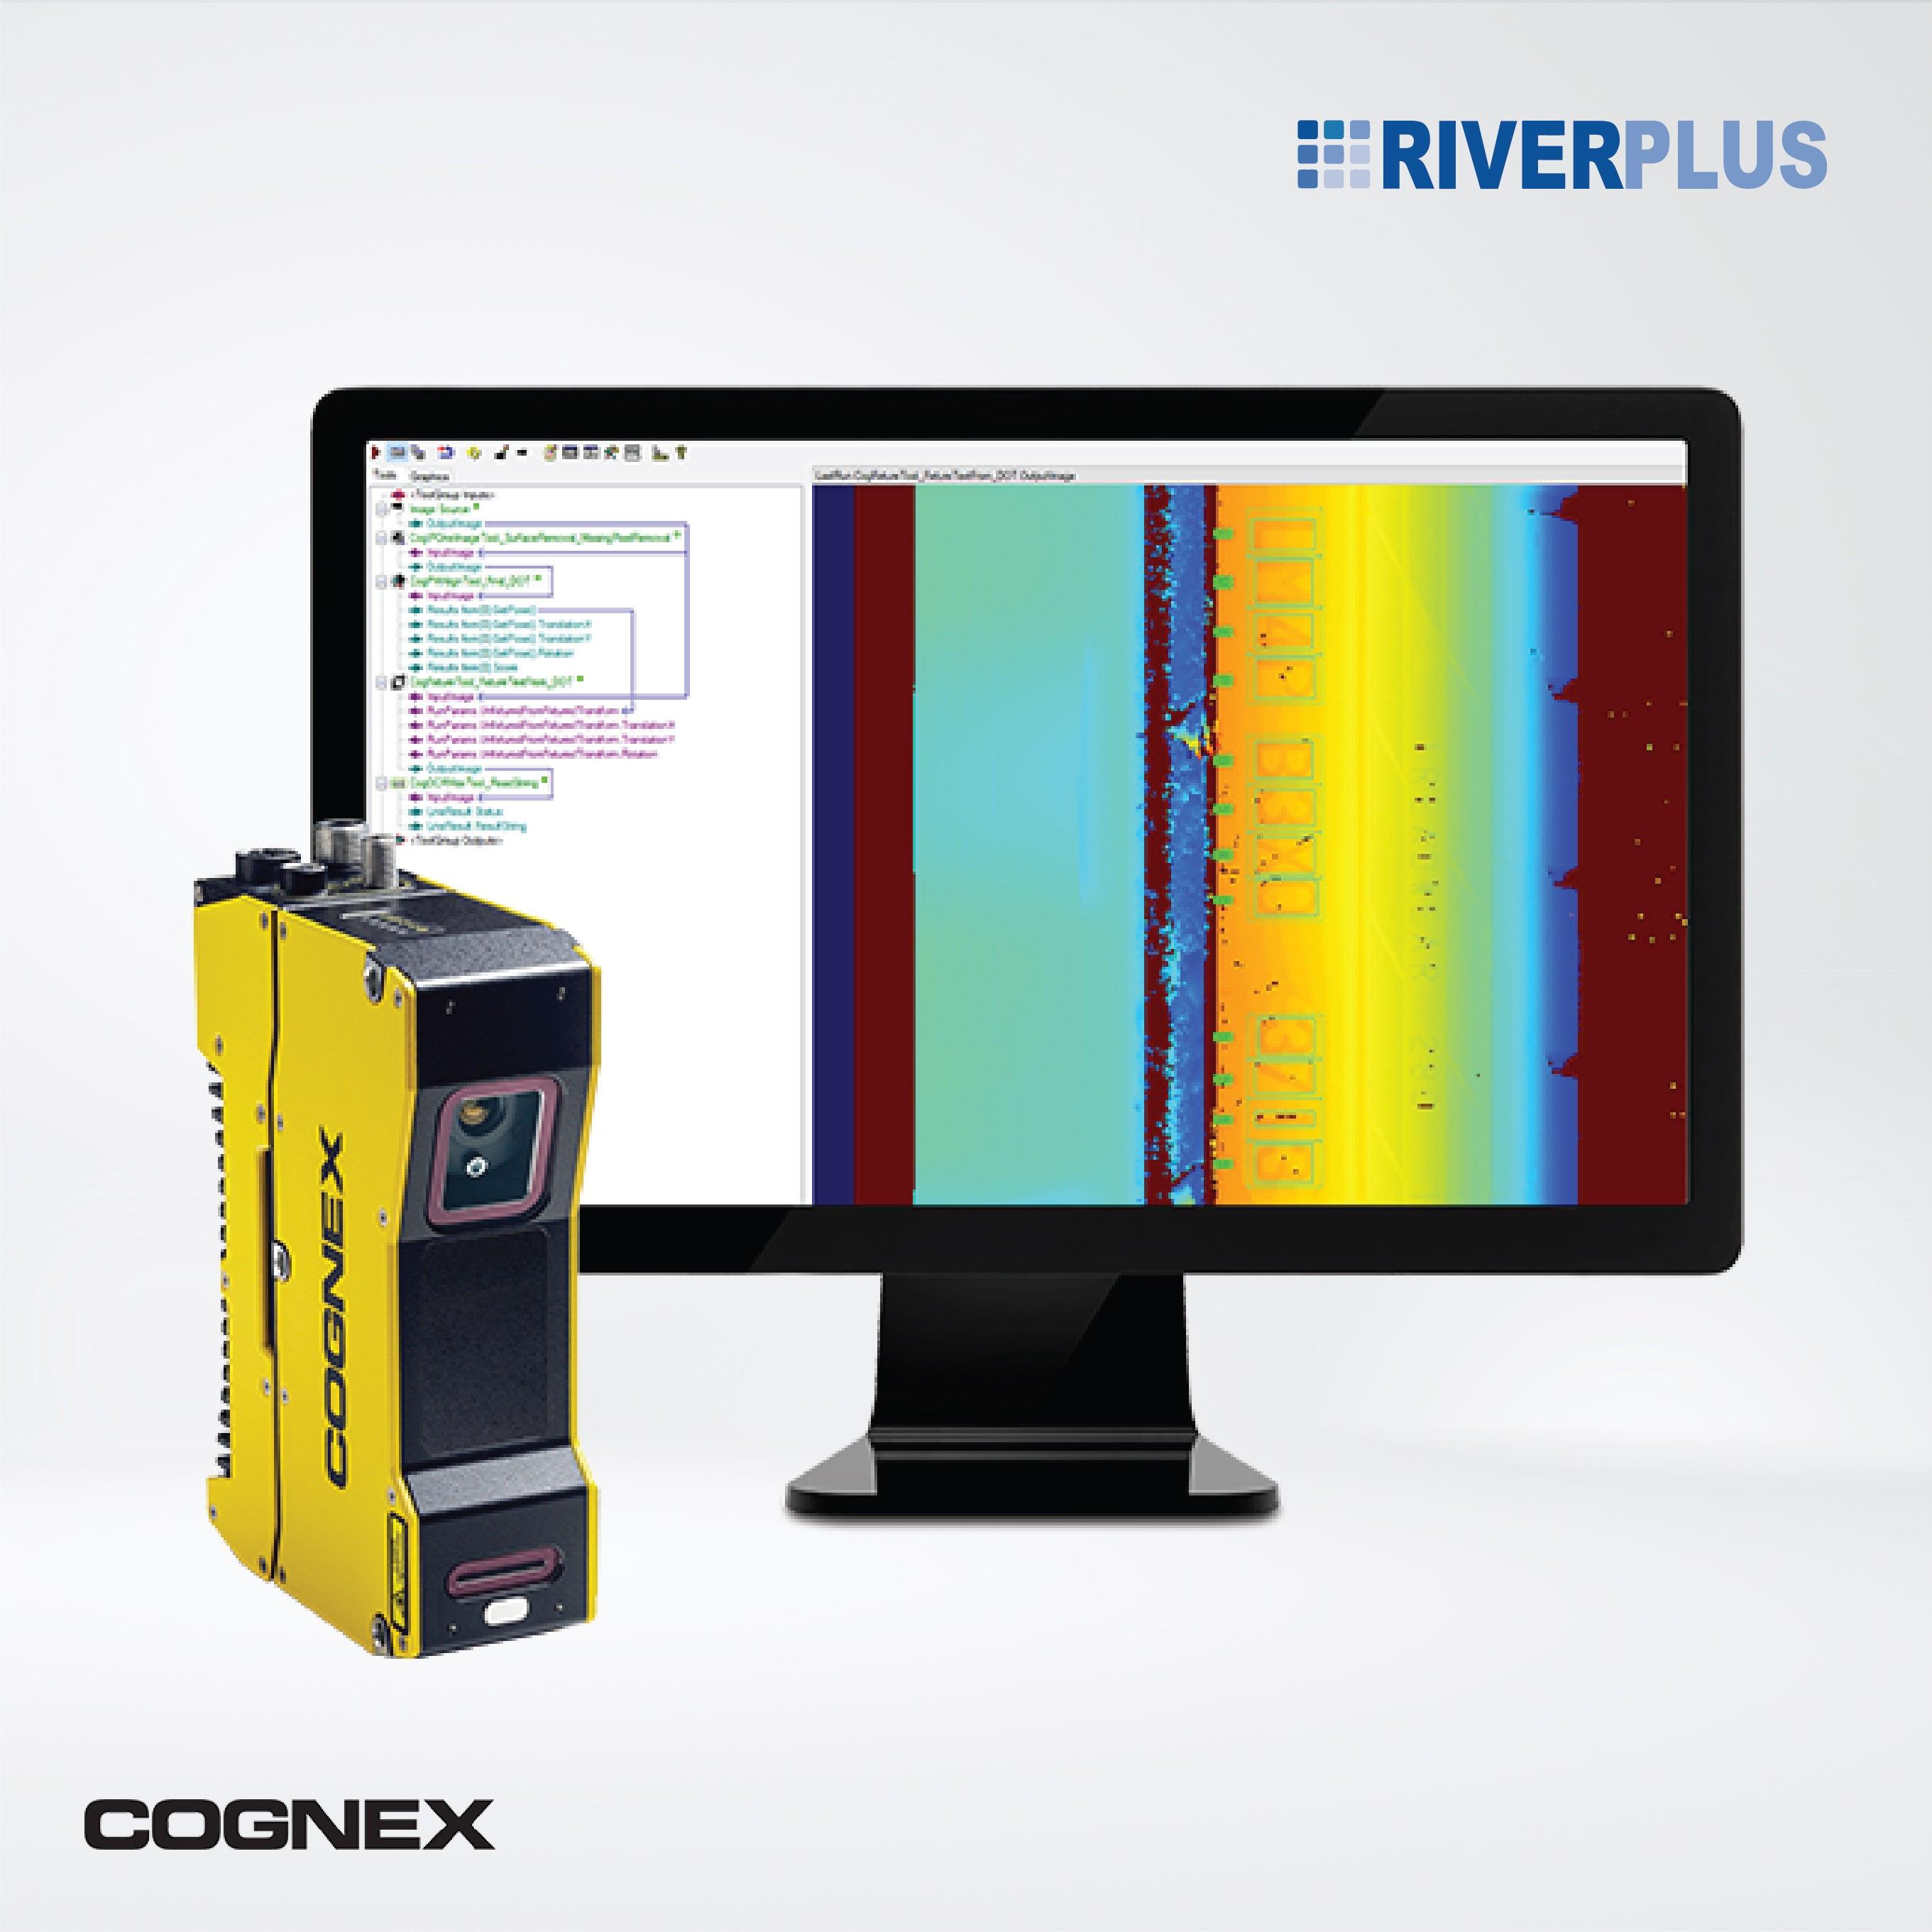 3D-L4000 with VisionPro , 3D laser displacement sensor with PC-based development environment - Riverplus